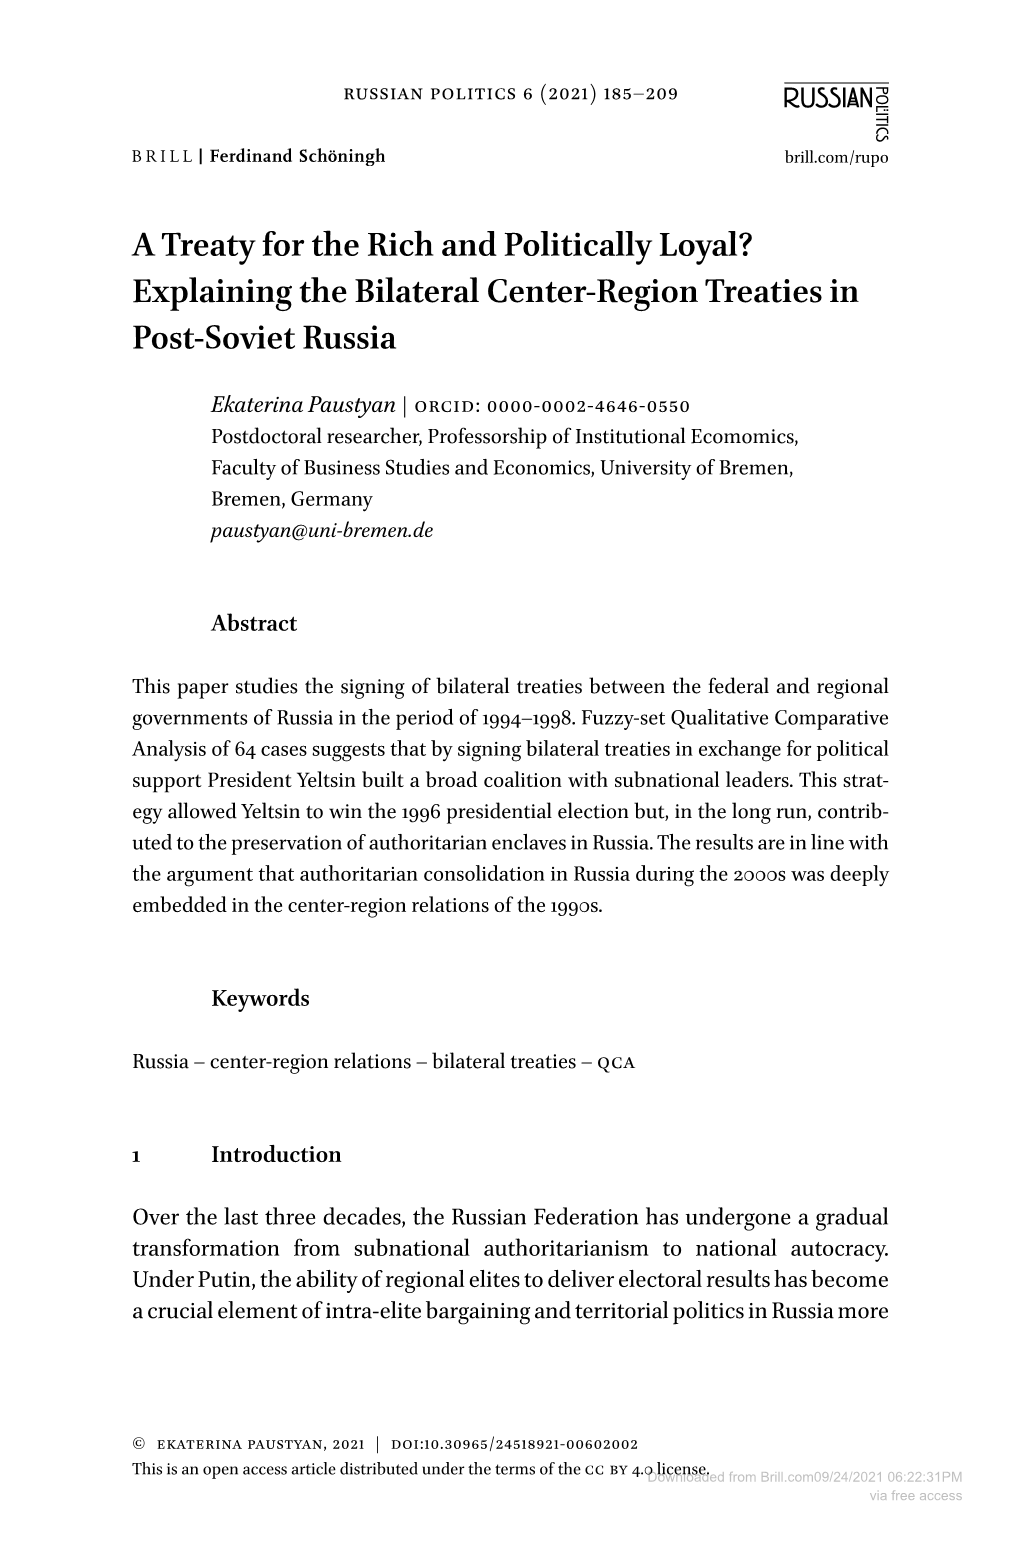 A Treaty for the Rich and Politically Loyal? Explaining the Bilateral Center-Region Treaties in Post-Soviet Russia